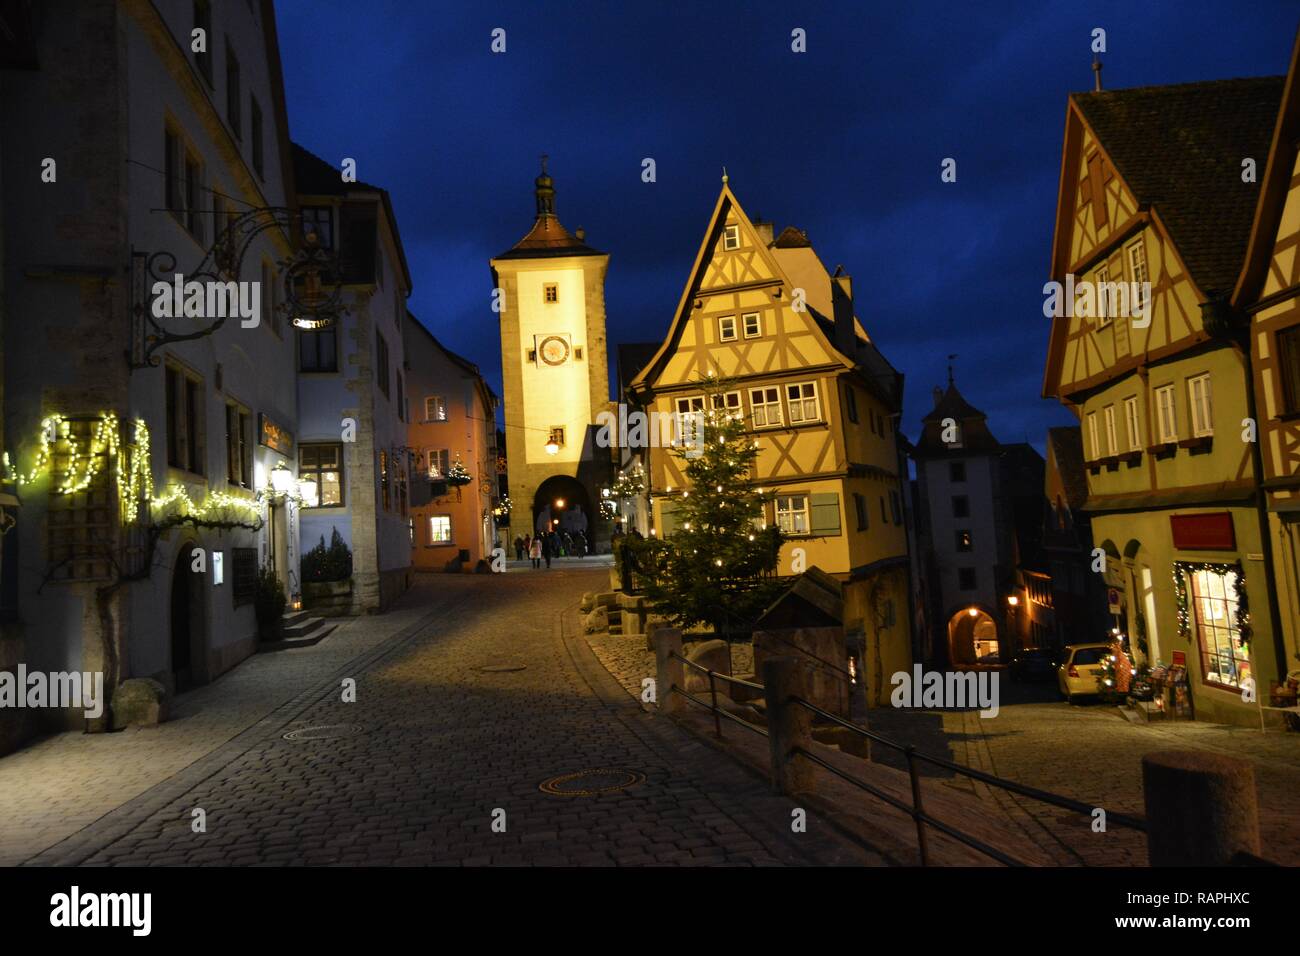 A Fairy - Tale Dream Town - Rothenburg ob der tauber, Germany. Christmas night view. Stock Photo